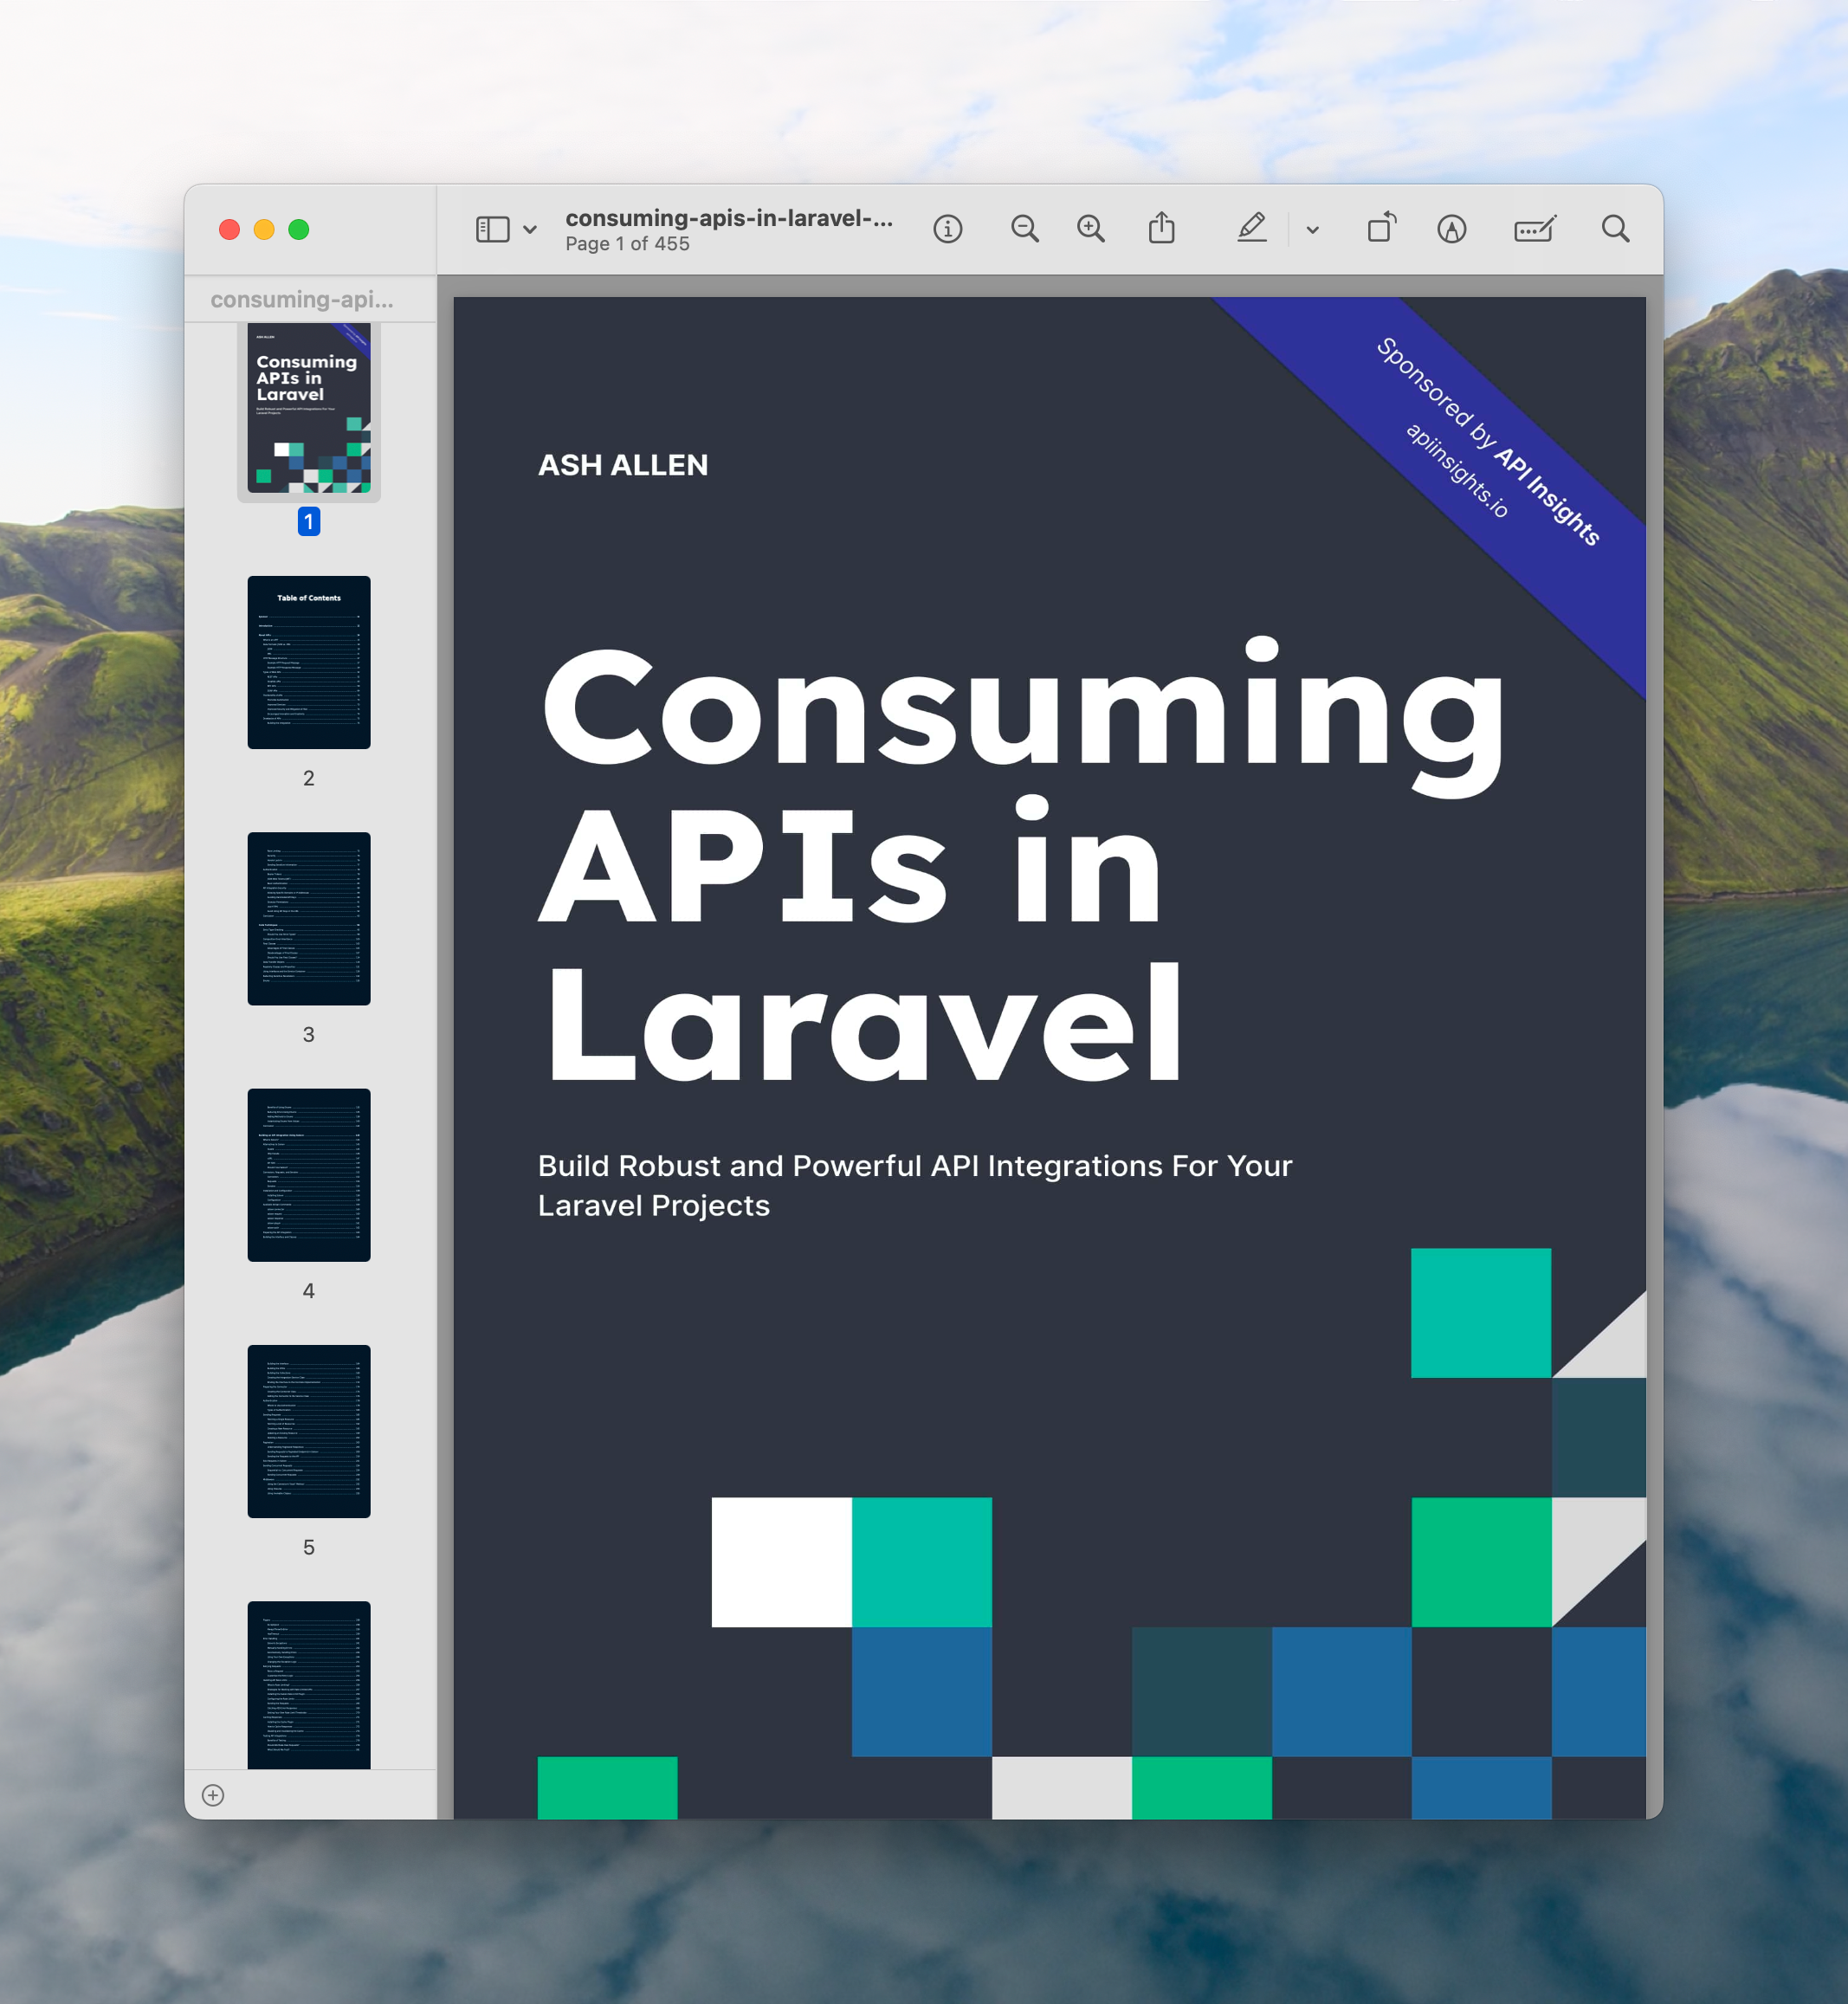 The Consuming APIs with Laravel book by Ash Allen.